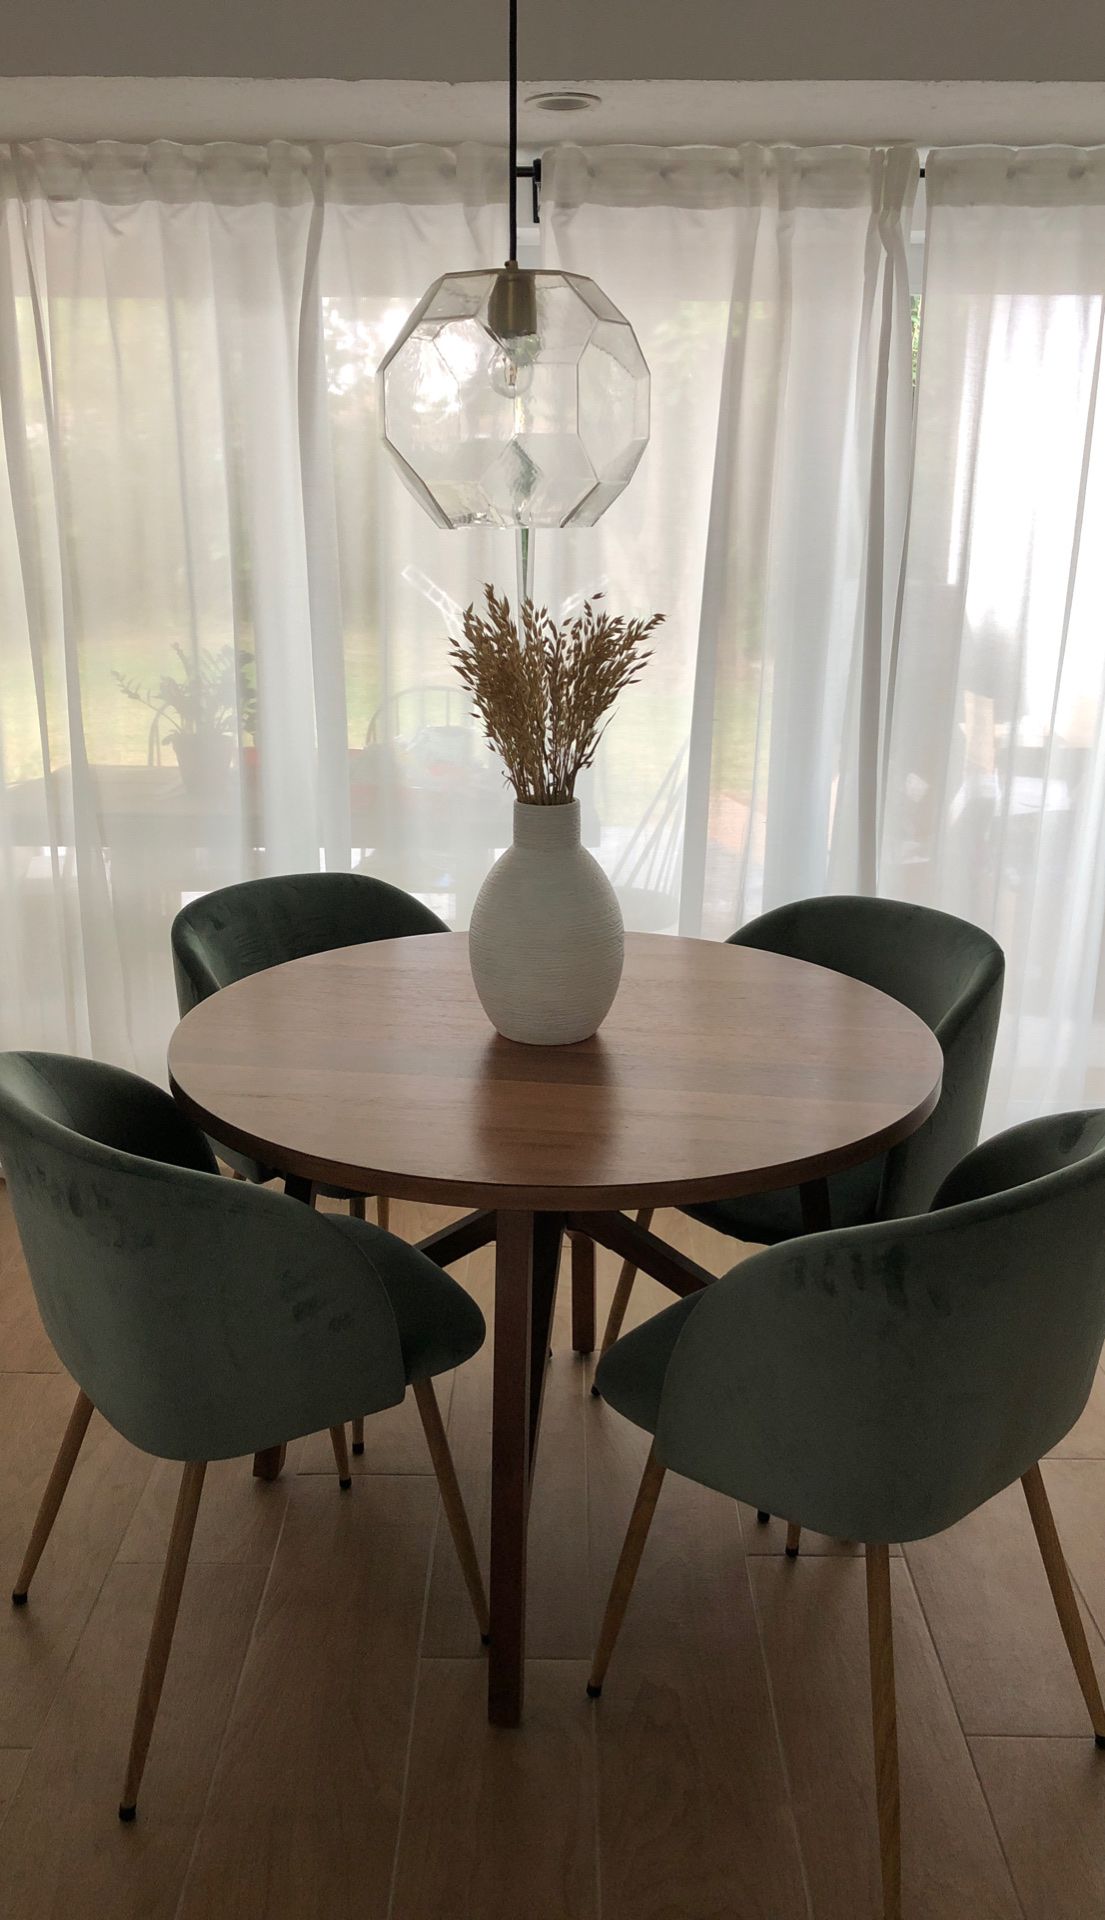 Round midcentury modern dining table